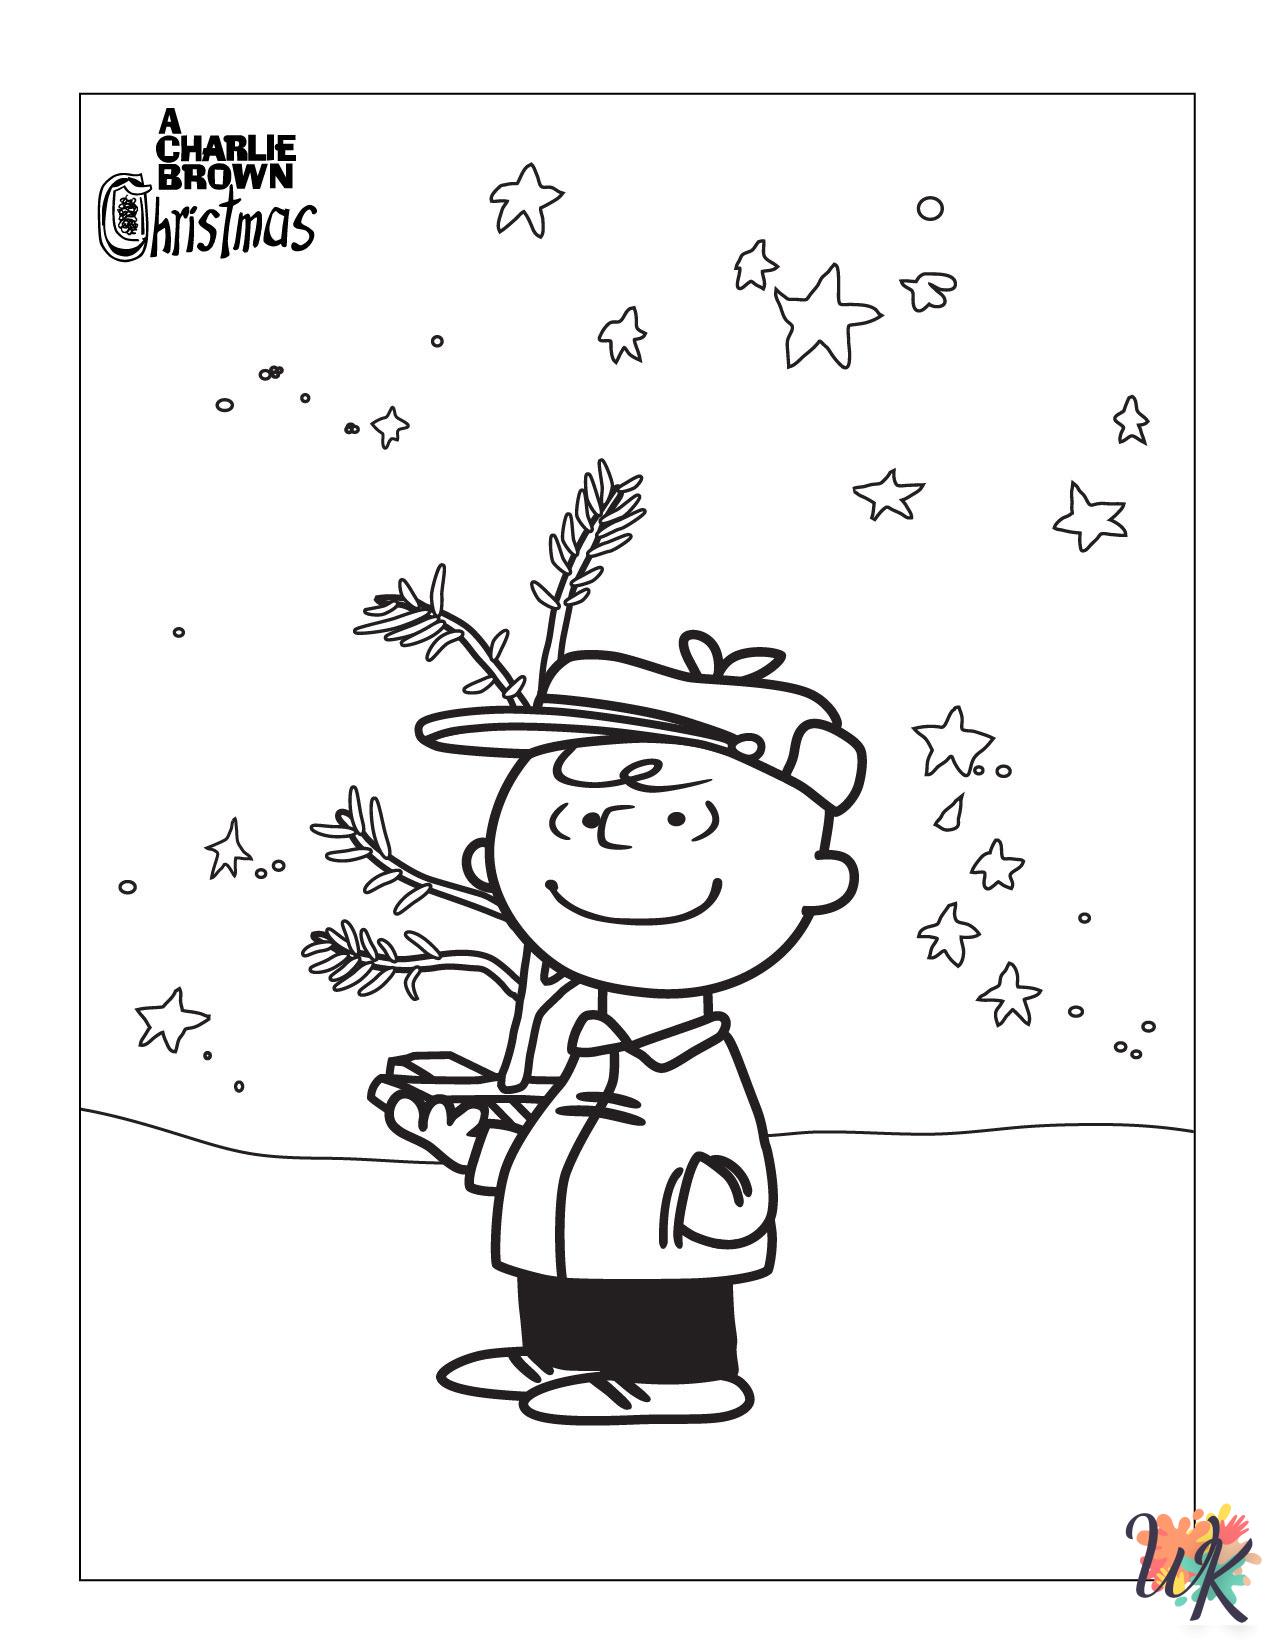 Peanuts coloring pages for preschoolers